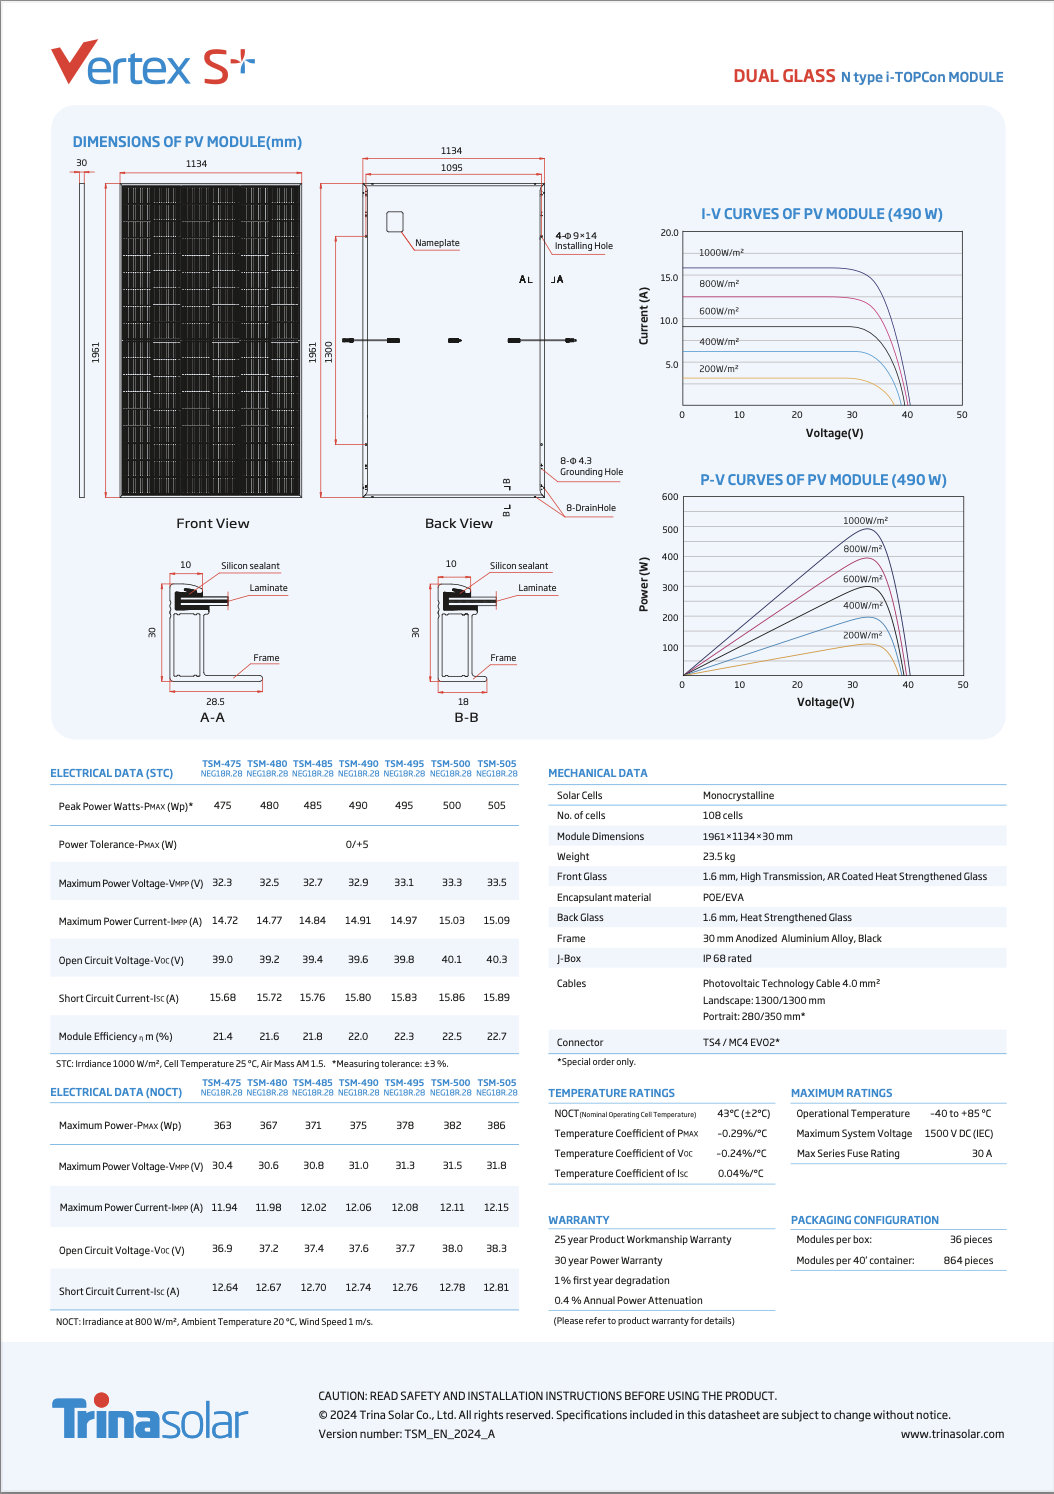 Technical specification datasheet for the Trina Solar Vertex S+ Dual Glass N-type i-TOPCon Module. This datasheet includes detailed diagrams of the module's front and back views, indicating precise dimensions and component placements. It also features performance graphs such as I-V and P-V curves under various irradiance levels, showcasing the electrical characteristics like peak power outputs ranging from 475 to 505 watts, and module efficiency details. Additional information covers mechanical data, temperature ratings, maximum ratings, warranty, and packaging configuration for effective solar installation planning.